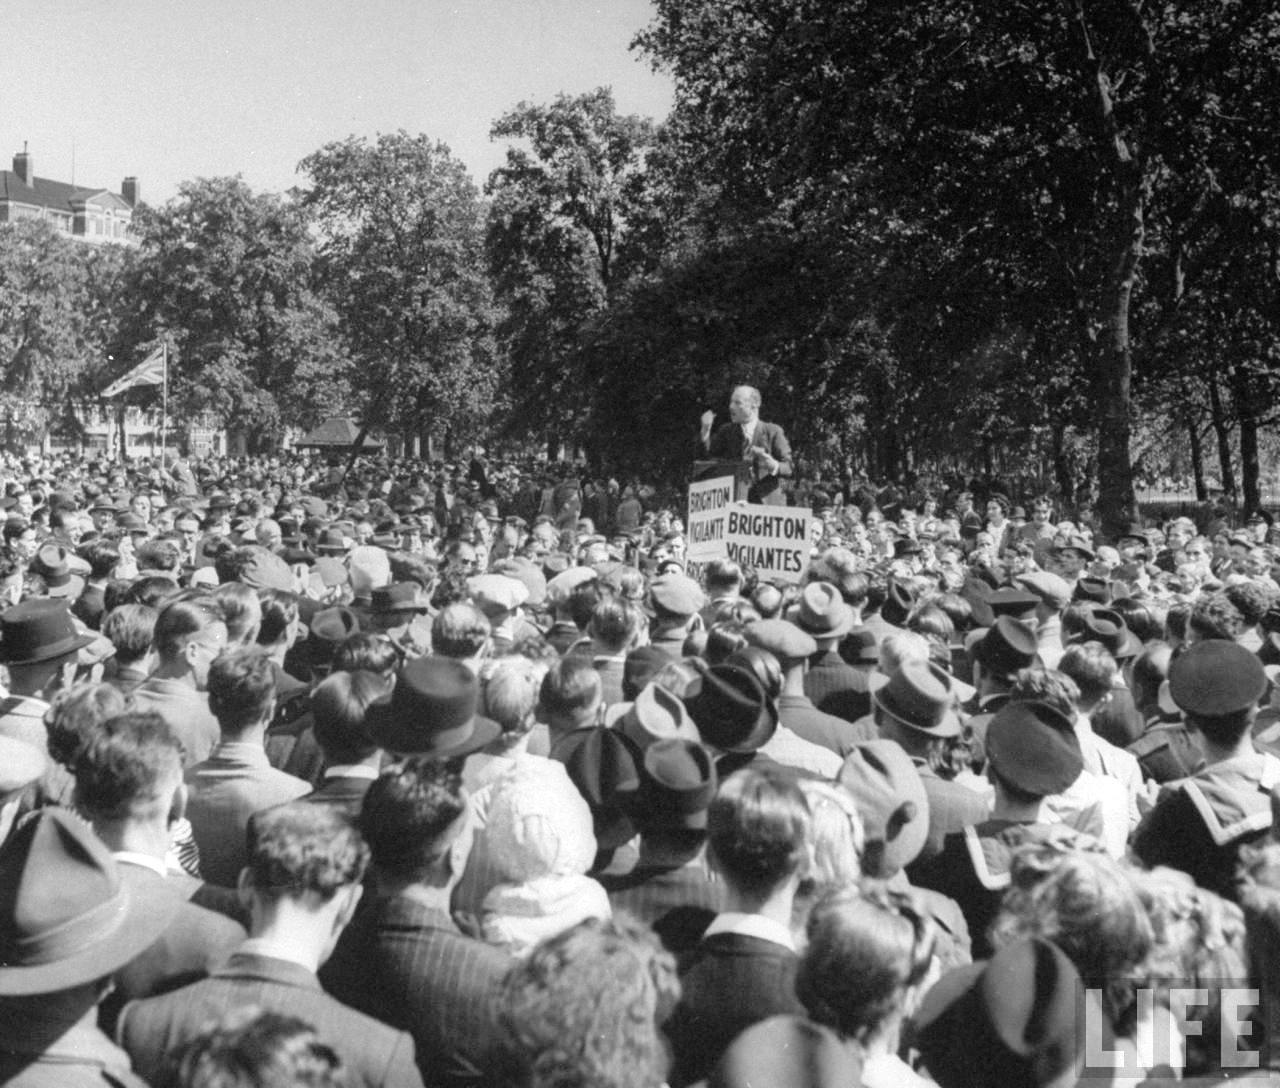 Harry speaking at a Vigilantes rally in Hyde Park (source: QueenSpark Books)